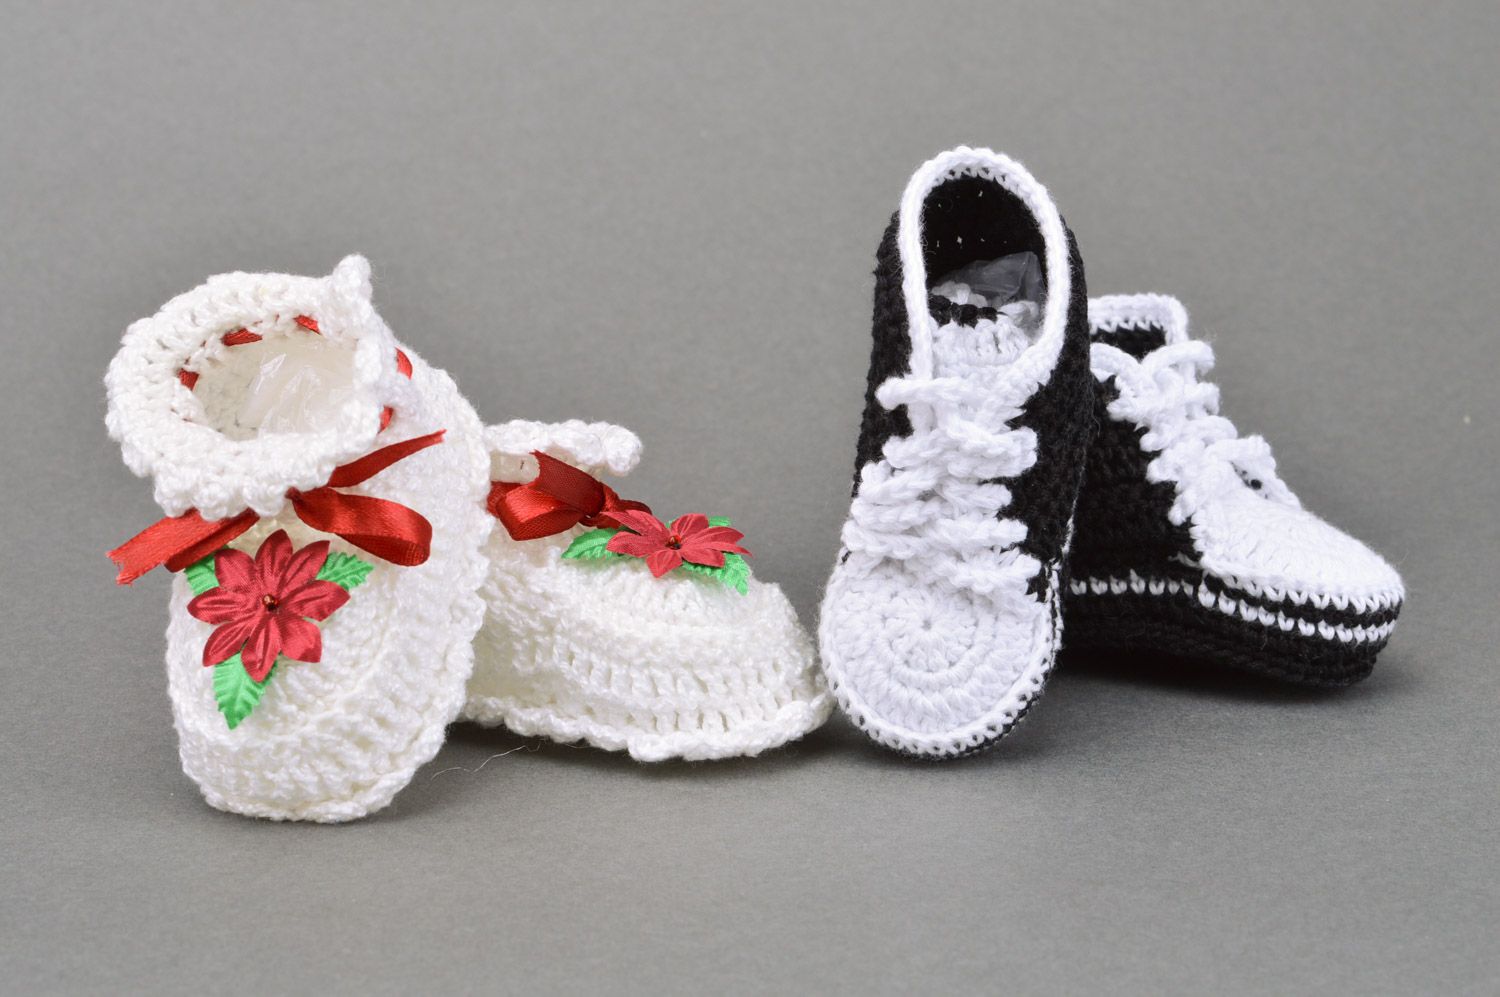 Handmade crocheted set of baby booties for boy and girl made of natural cotton photo 5